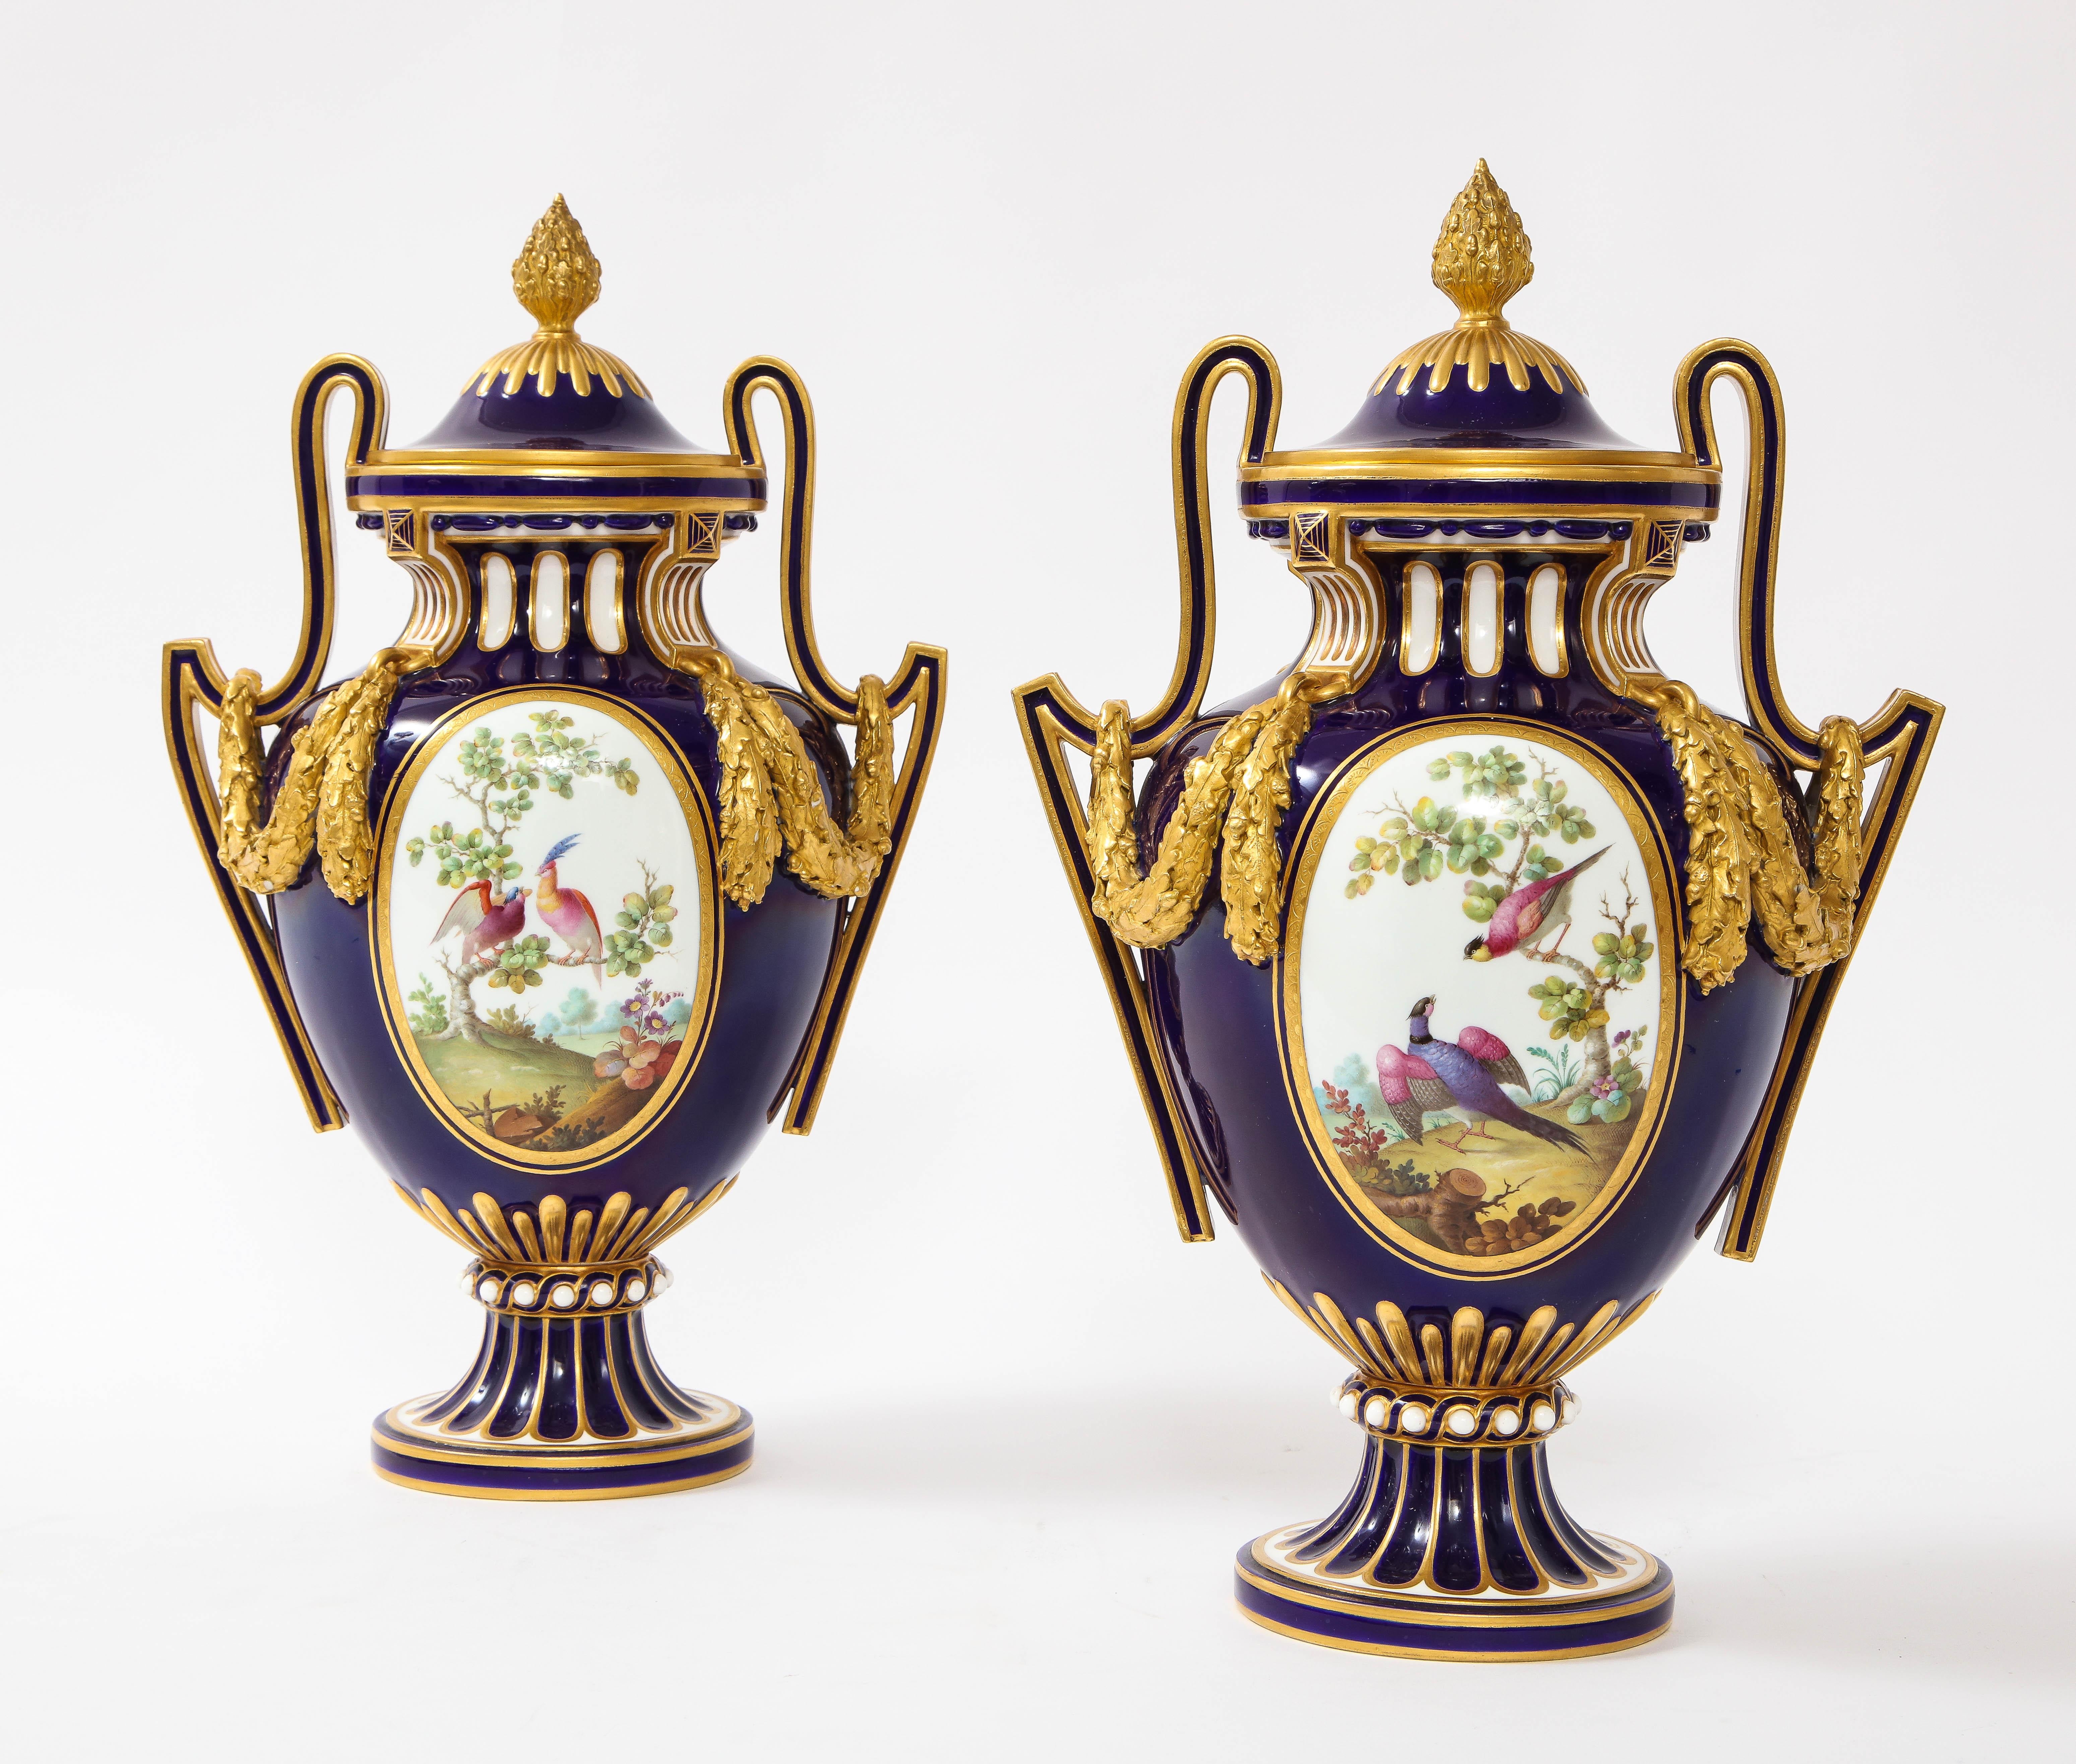 A fantastic and beautiful pair of antique 19th century mintons English porcelain Louis XVI style Sevres style blue nouveau ground hand-painted and hand-tooled-gilt, oval-shaped covered vases. These Mintons vases are truly remarkable. Of oval shape